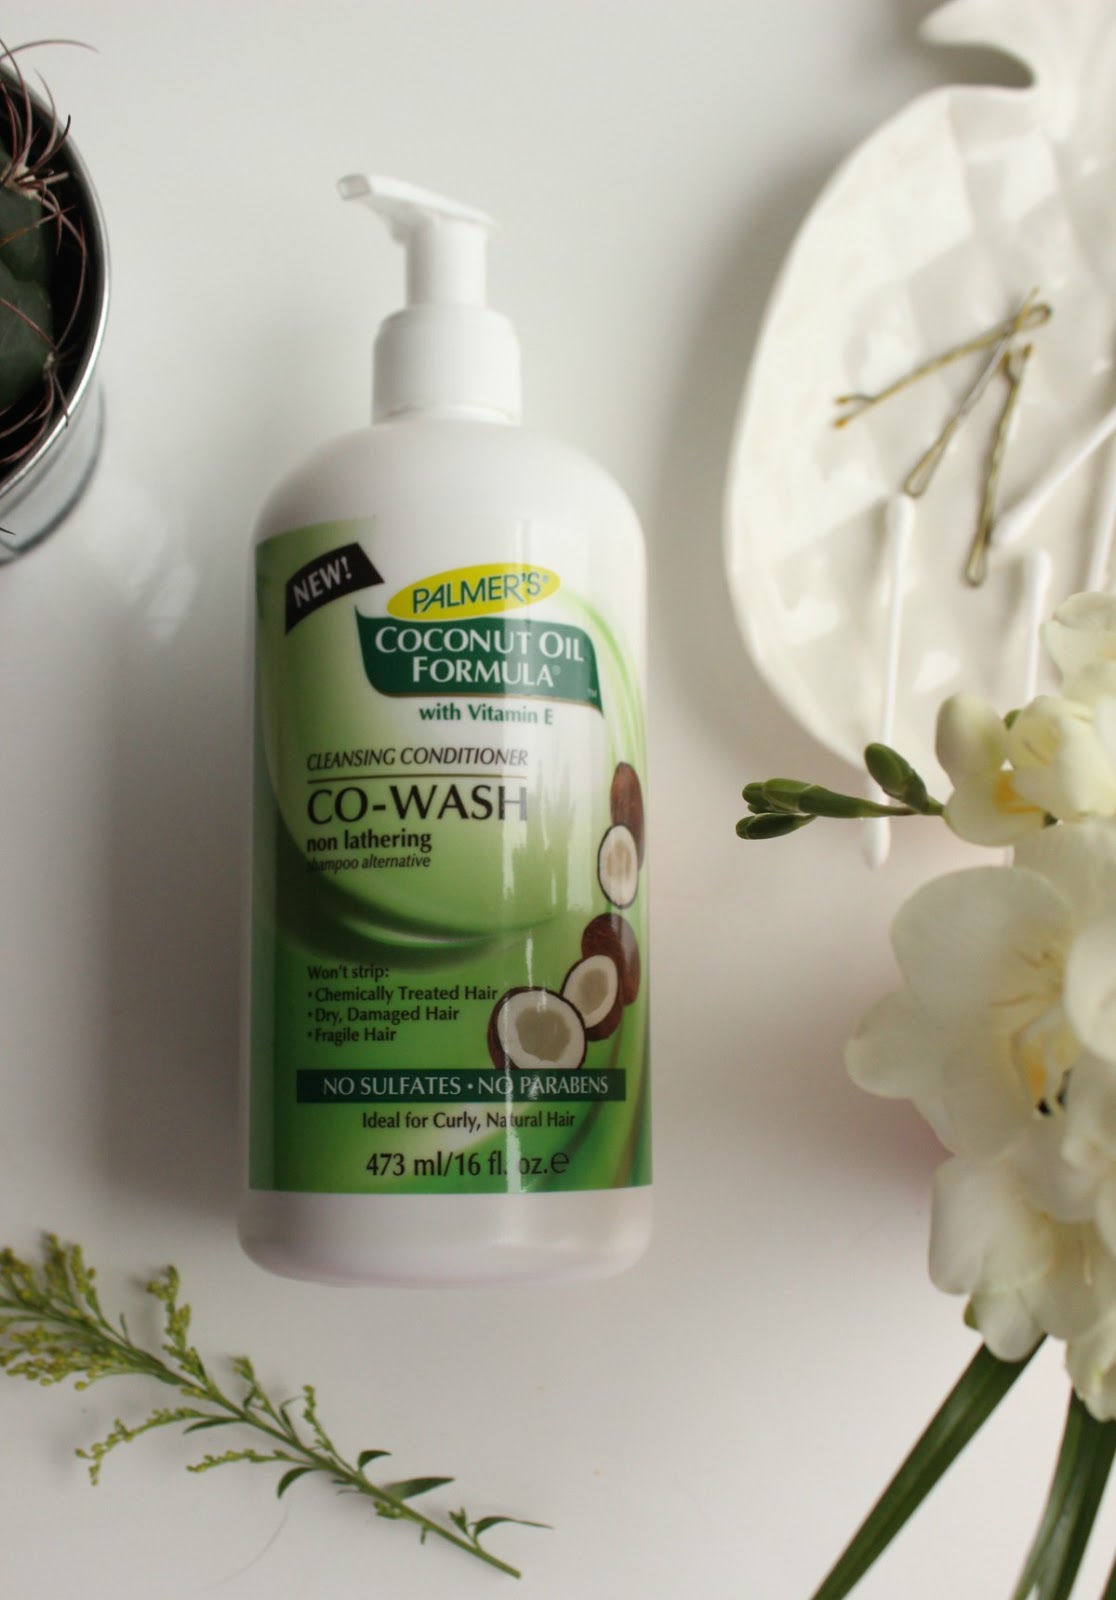 Palmer's Coconut Oil Formula Co-Wash Cleansing Conditioner